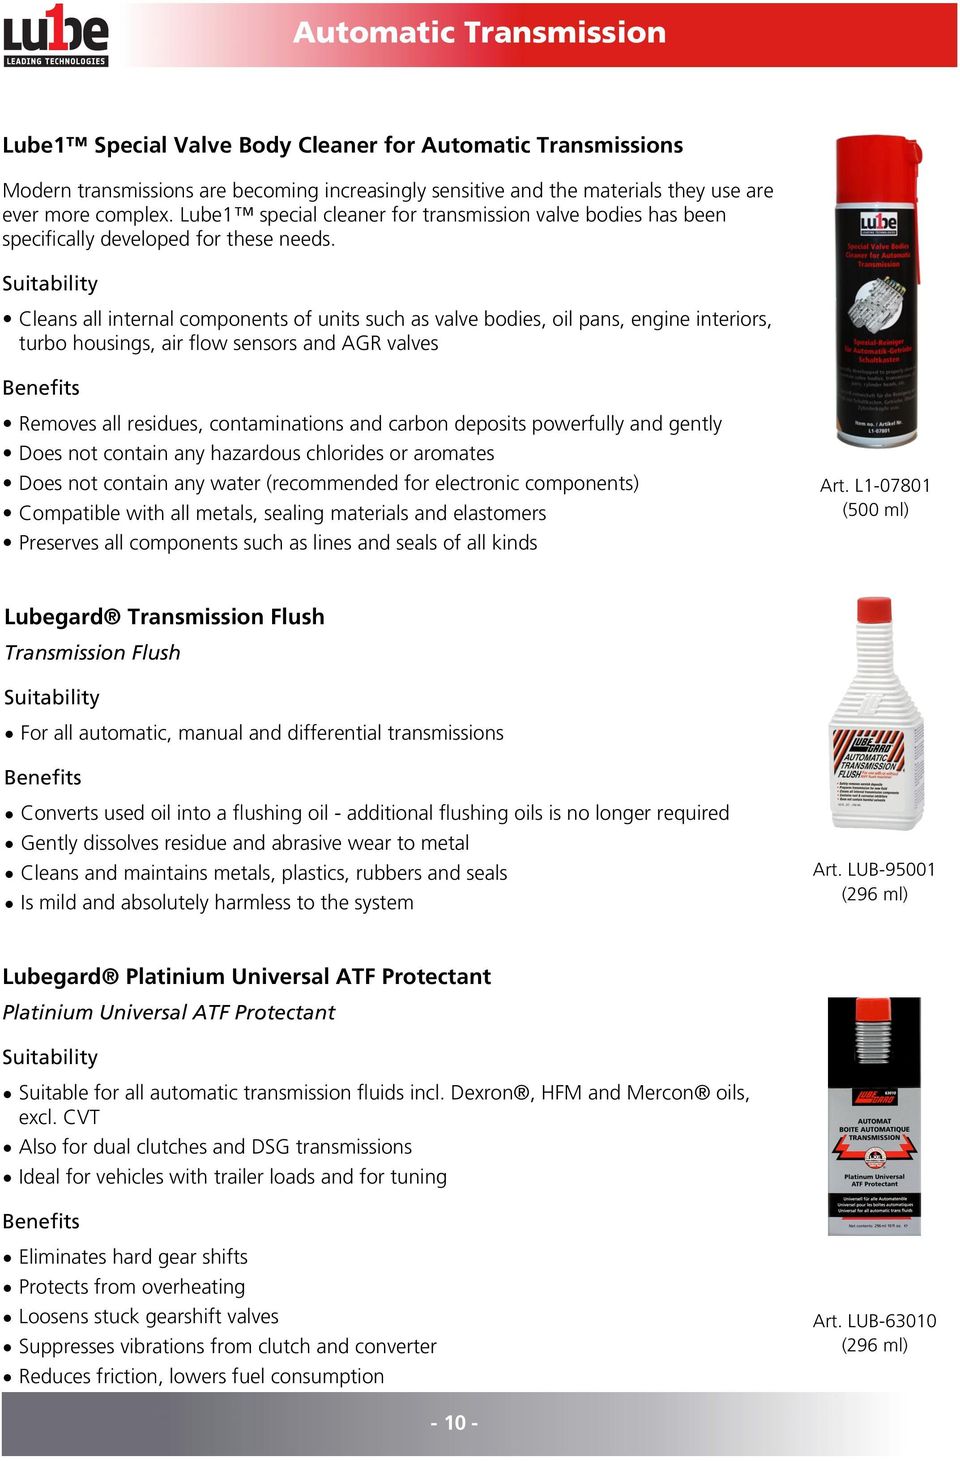 Cleans all internal components of units such as valve bodies, oil pans, engine interiors, turbo housings, air flow sensors and AGR valves Removes all residues, contaminations and carbon deposits